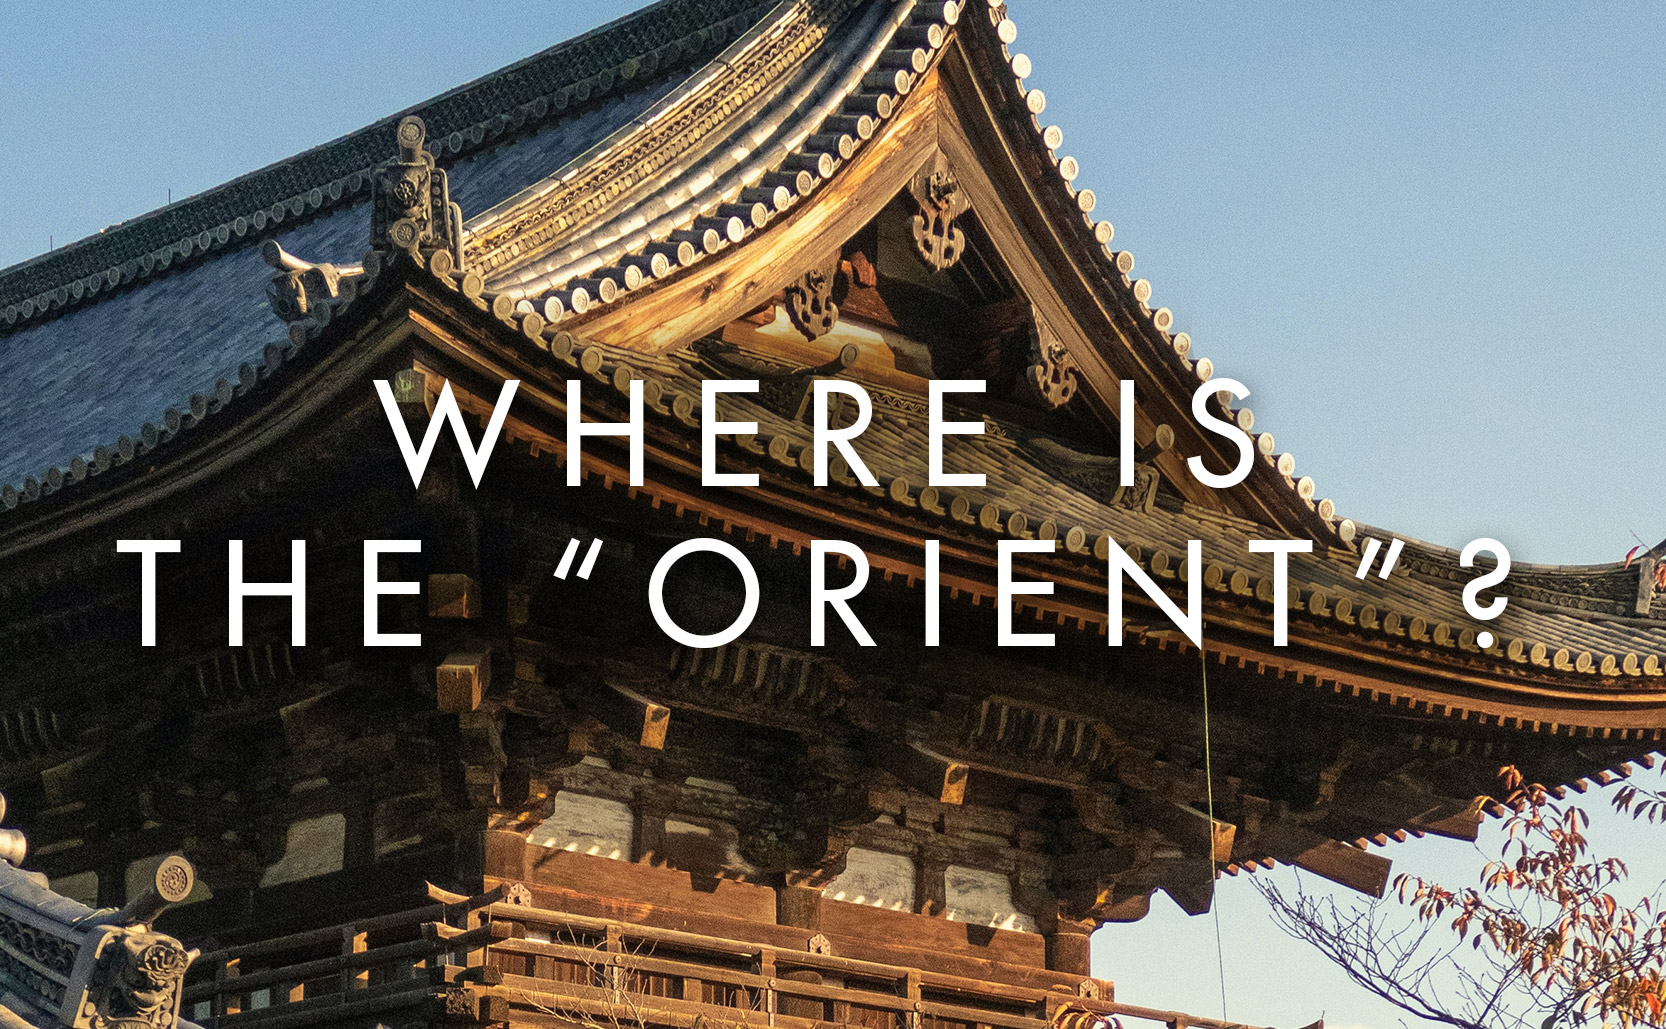 You are currently viewing Where is the “Orient”?